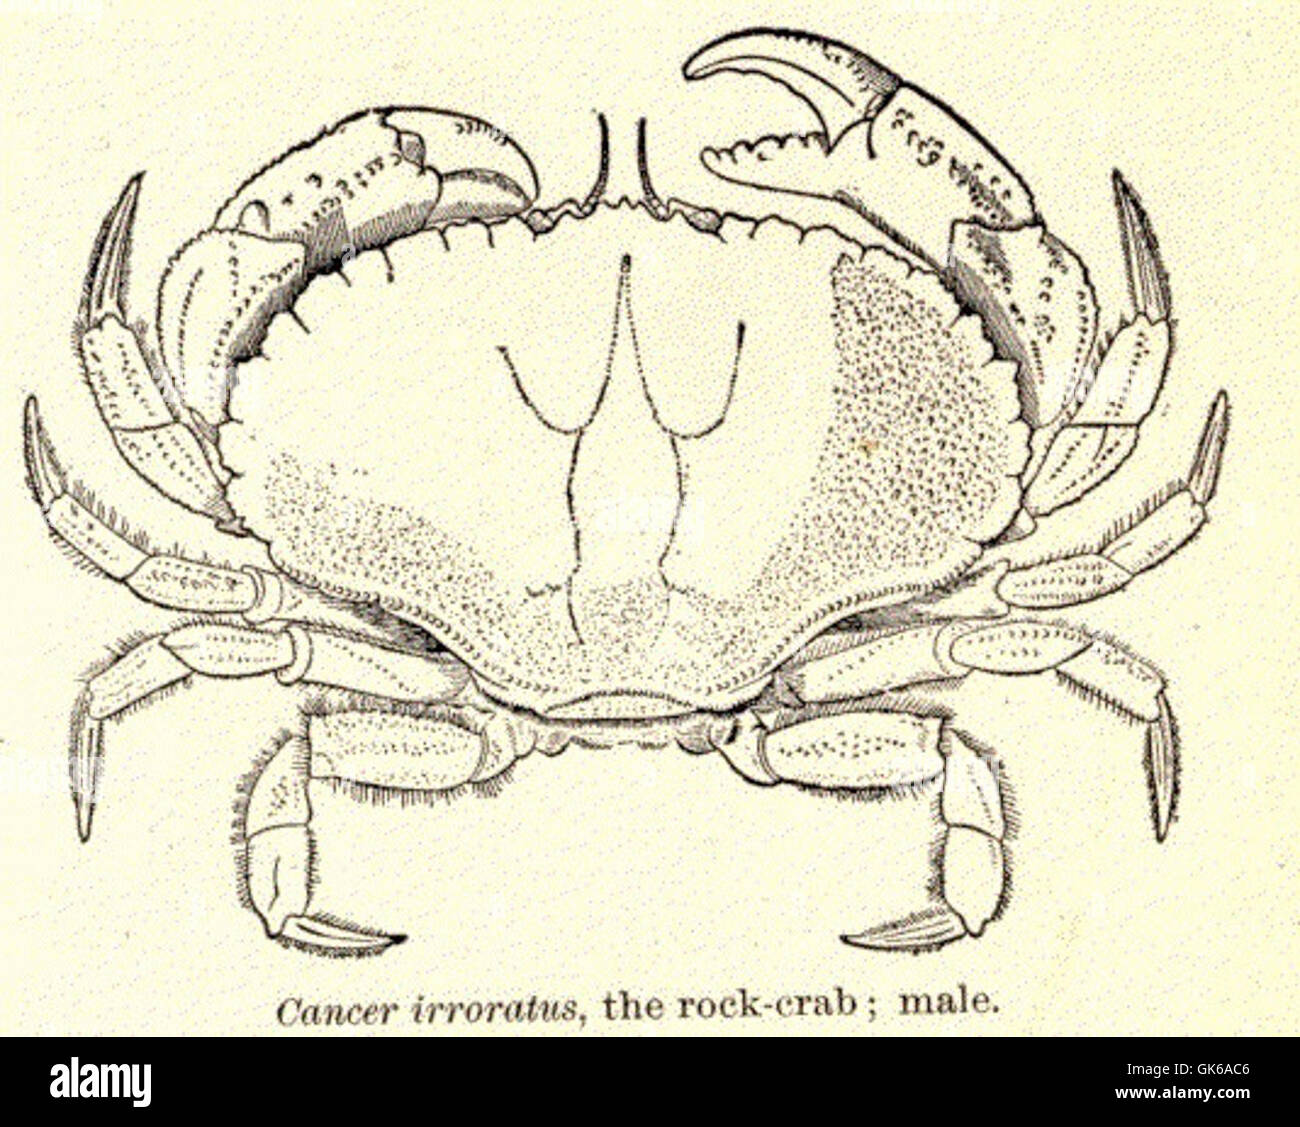 52682 Cancer irroratus, the rock-crab; male Stock Photo